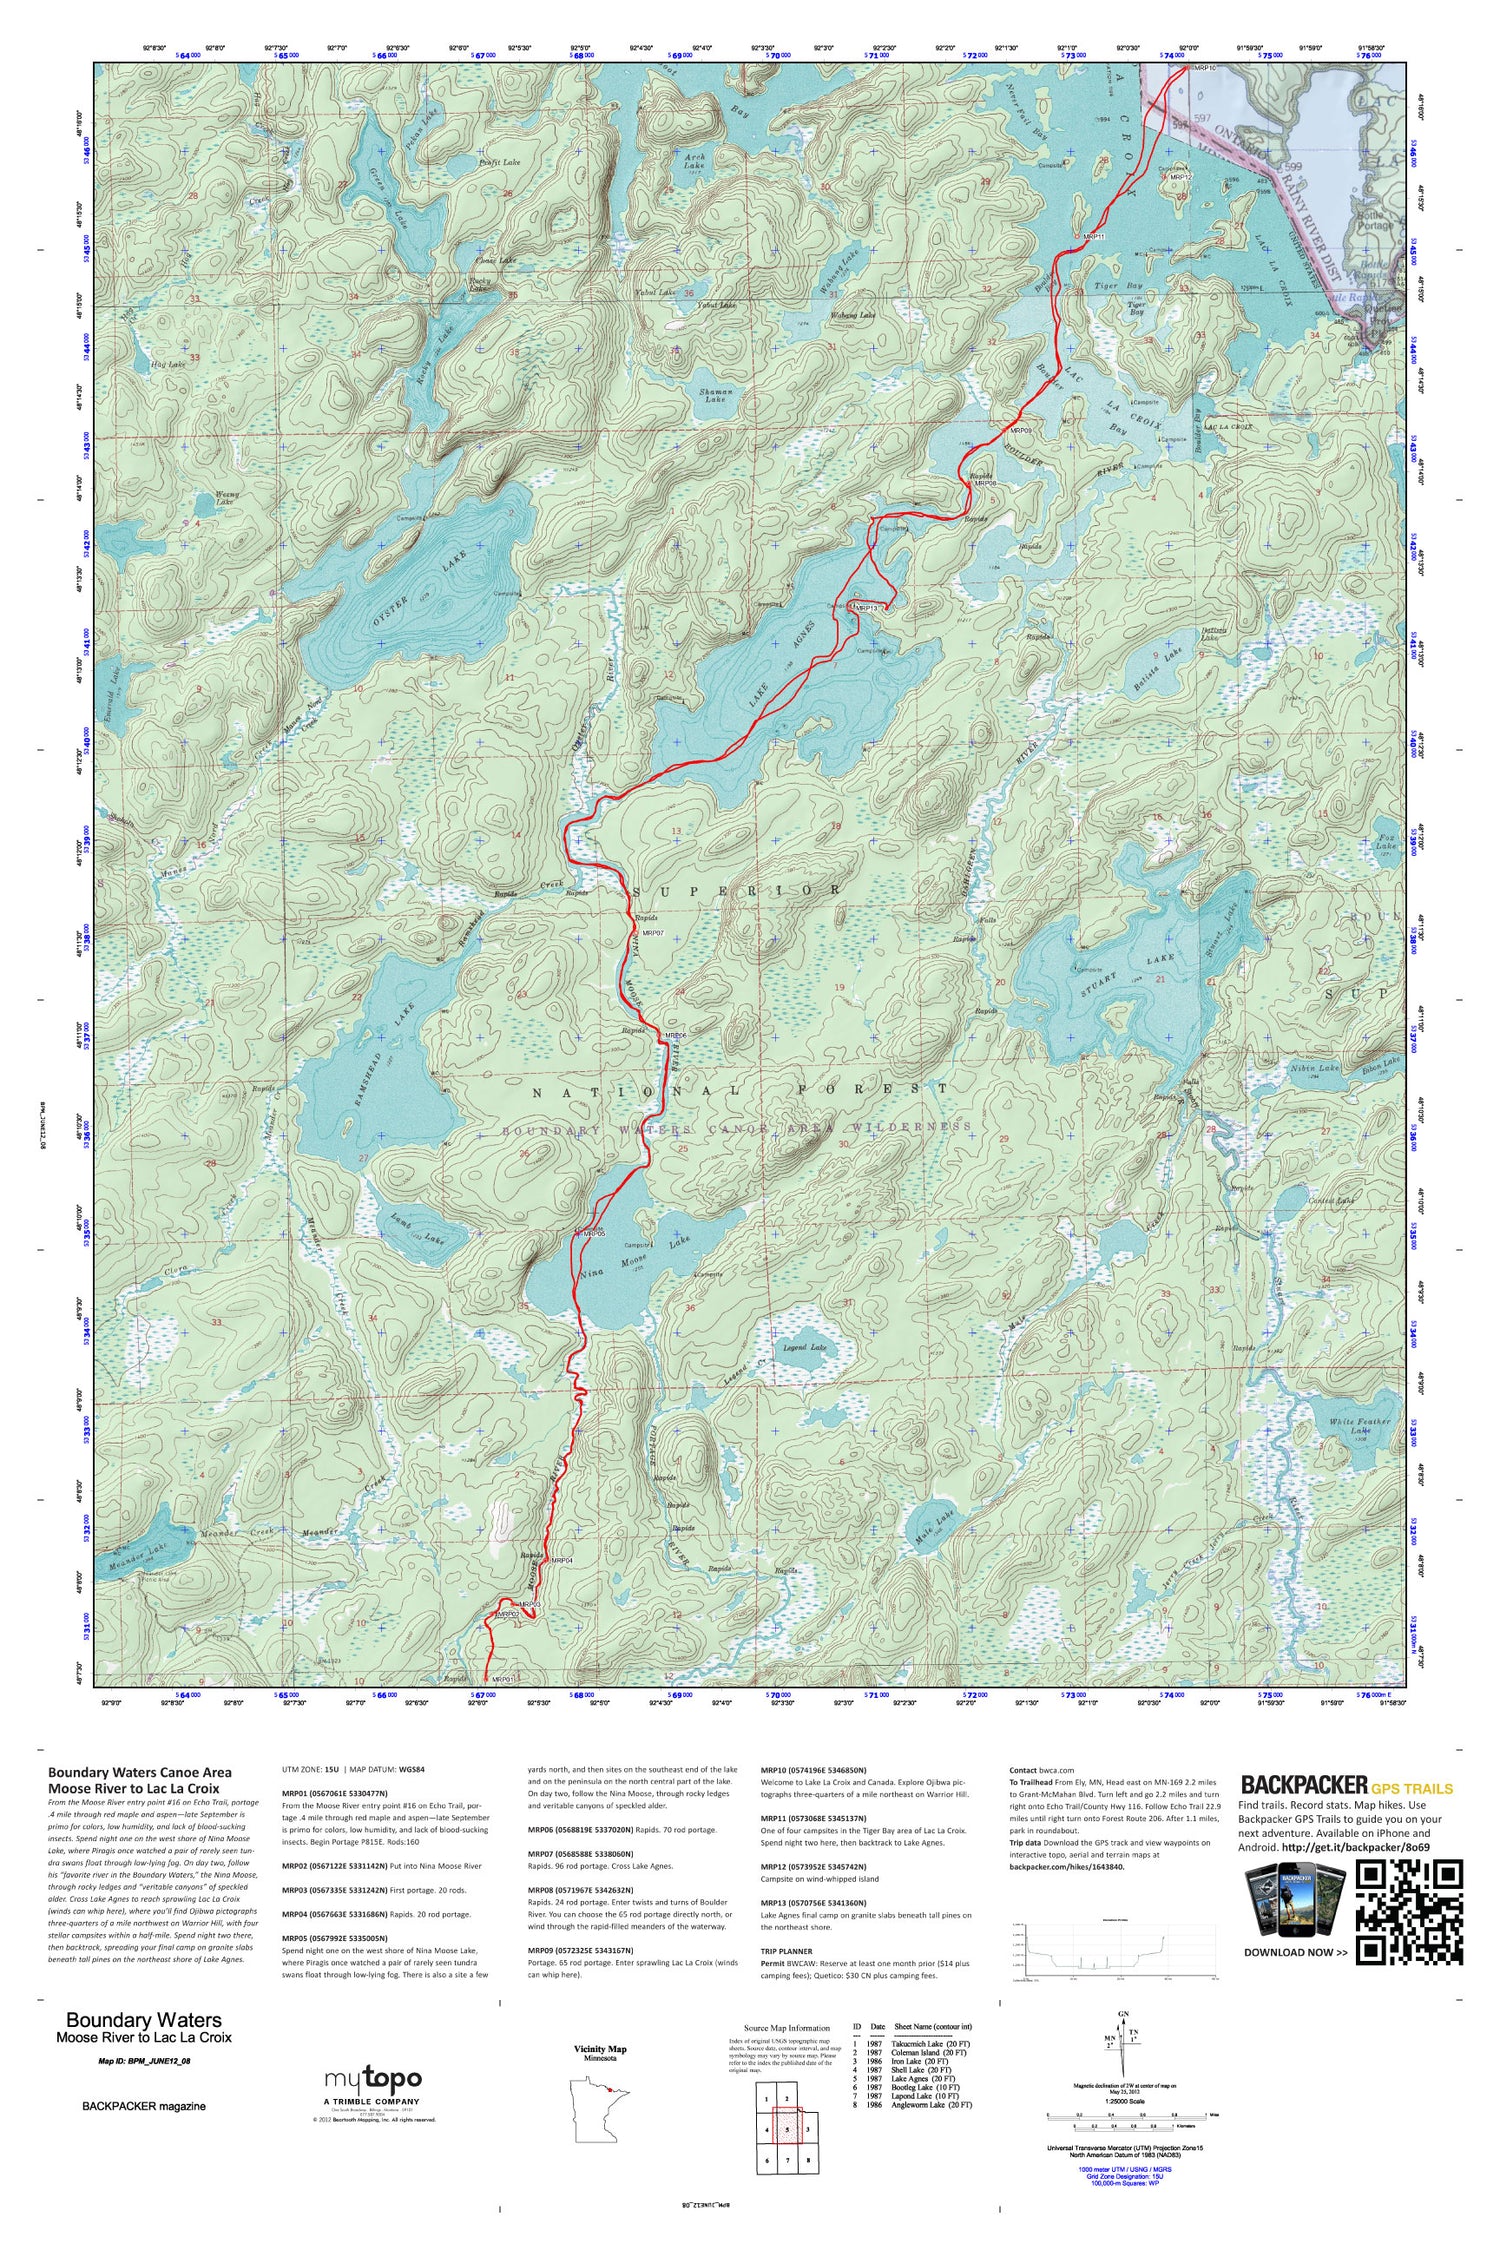 Moose River to Lac La Croix Map (Boundary Waters, Minnesota) Image